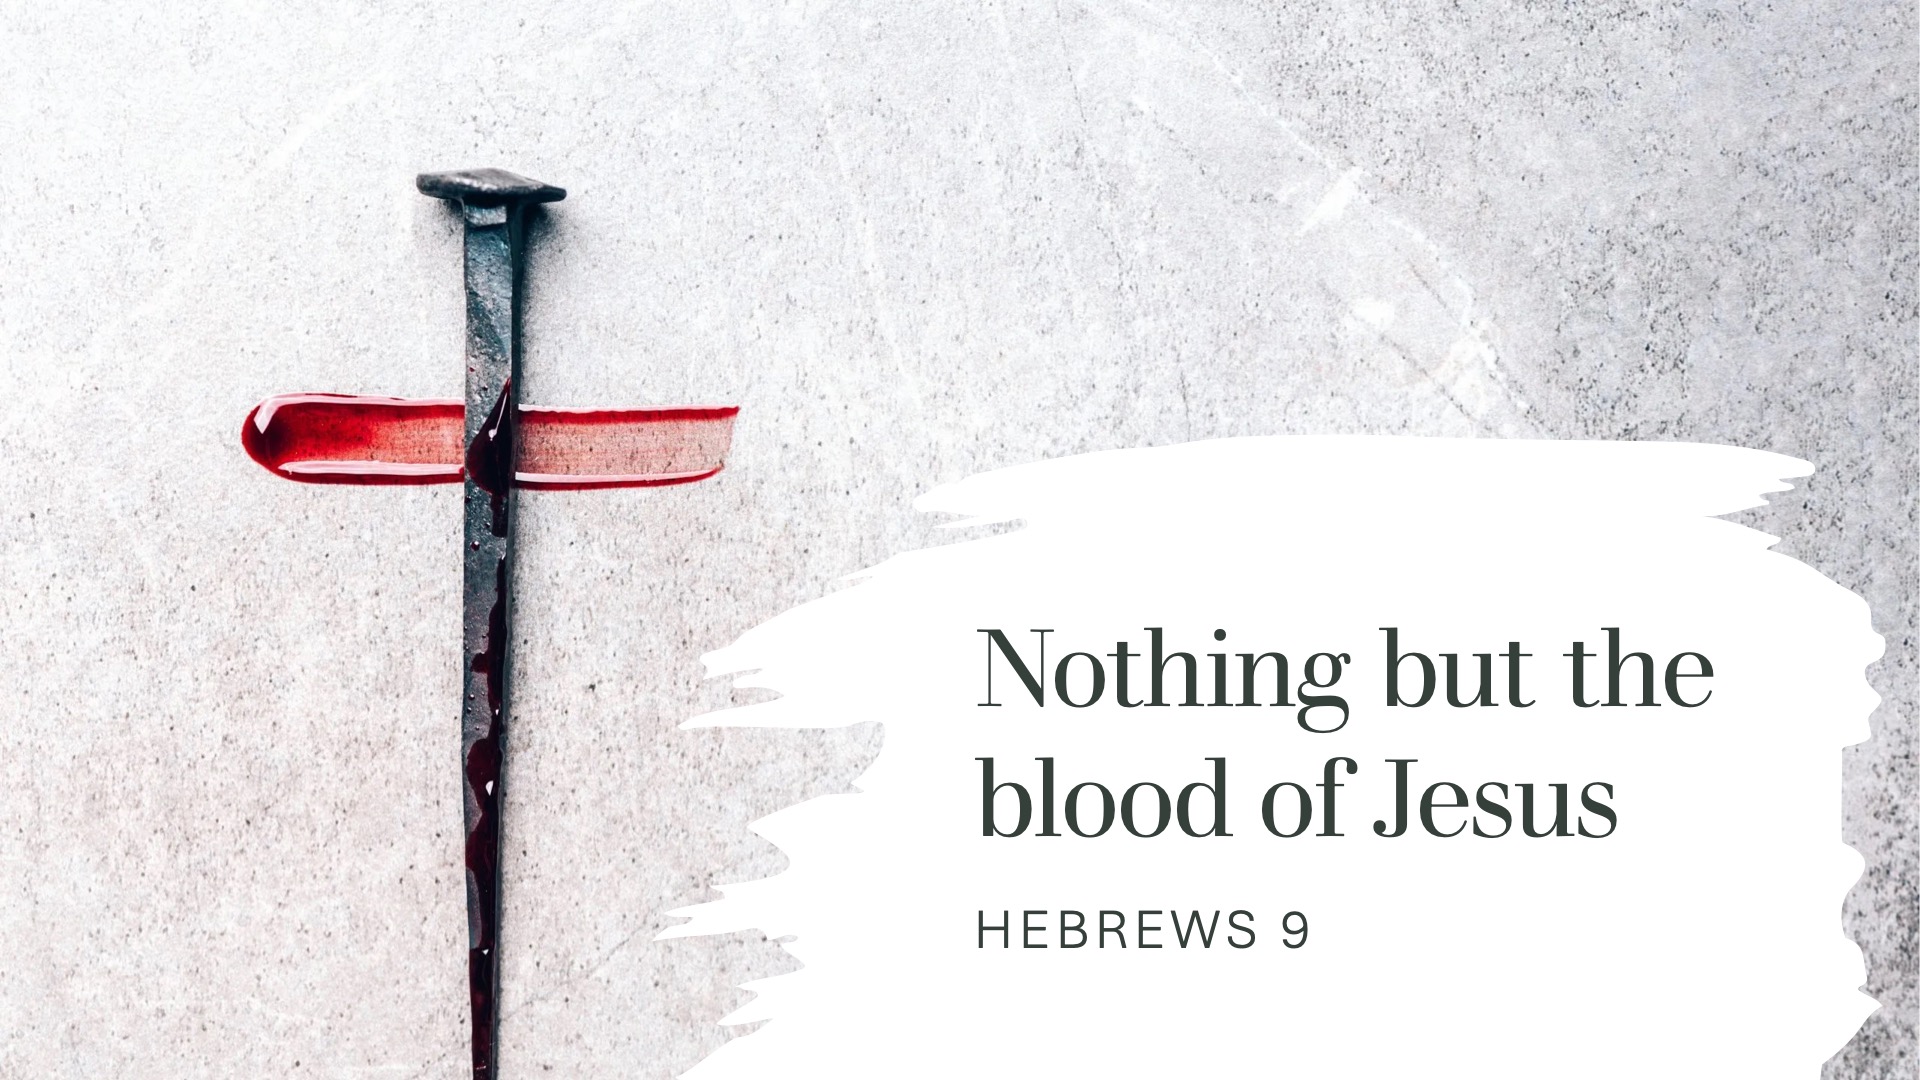 Nothing but the blood of Jesus